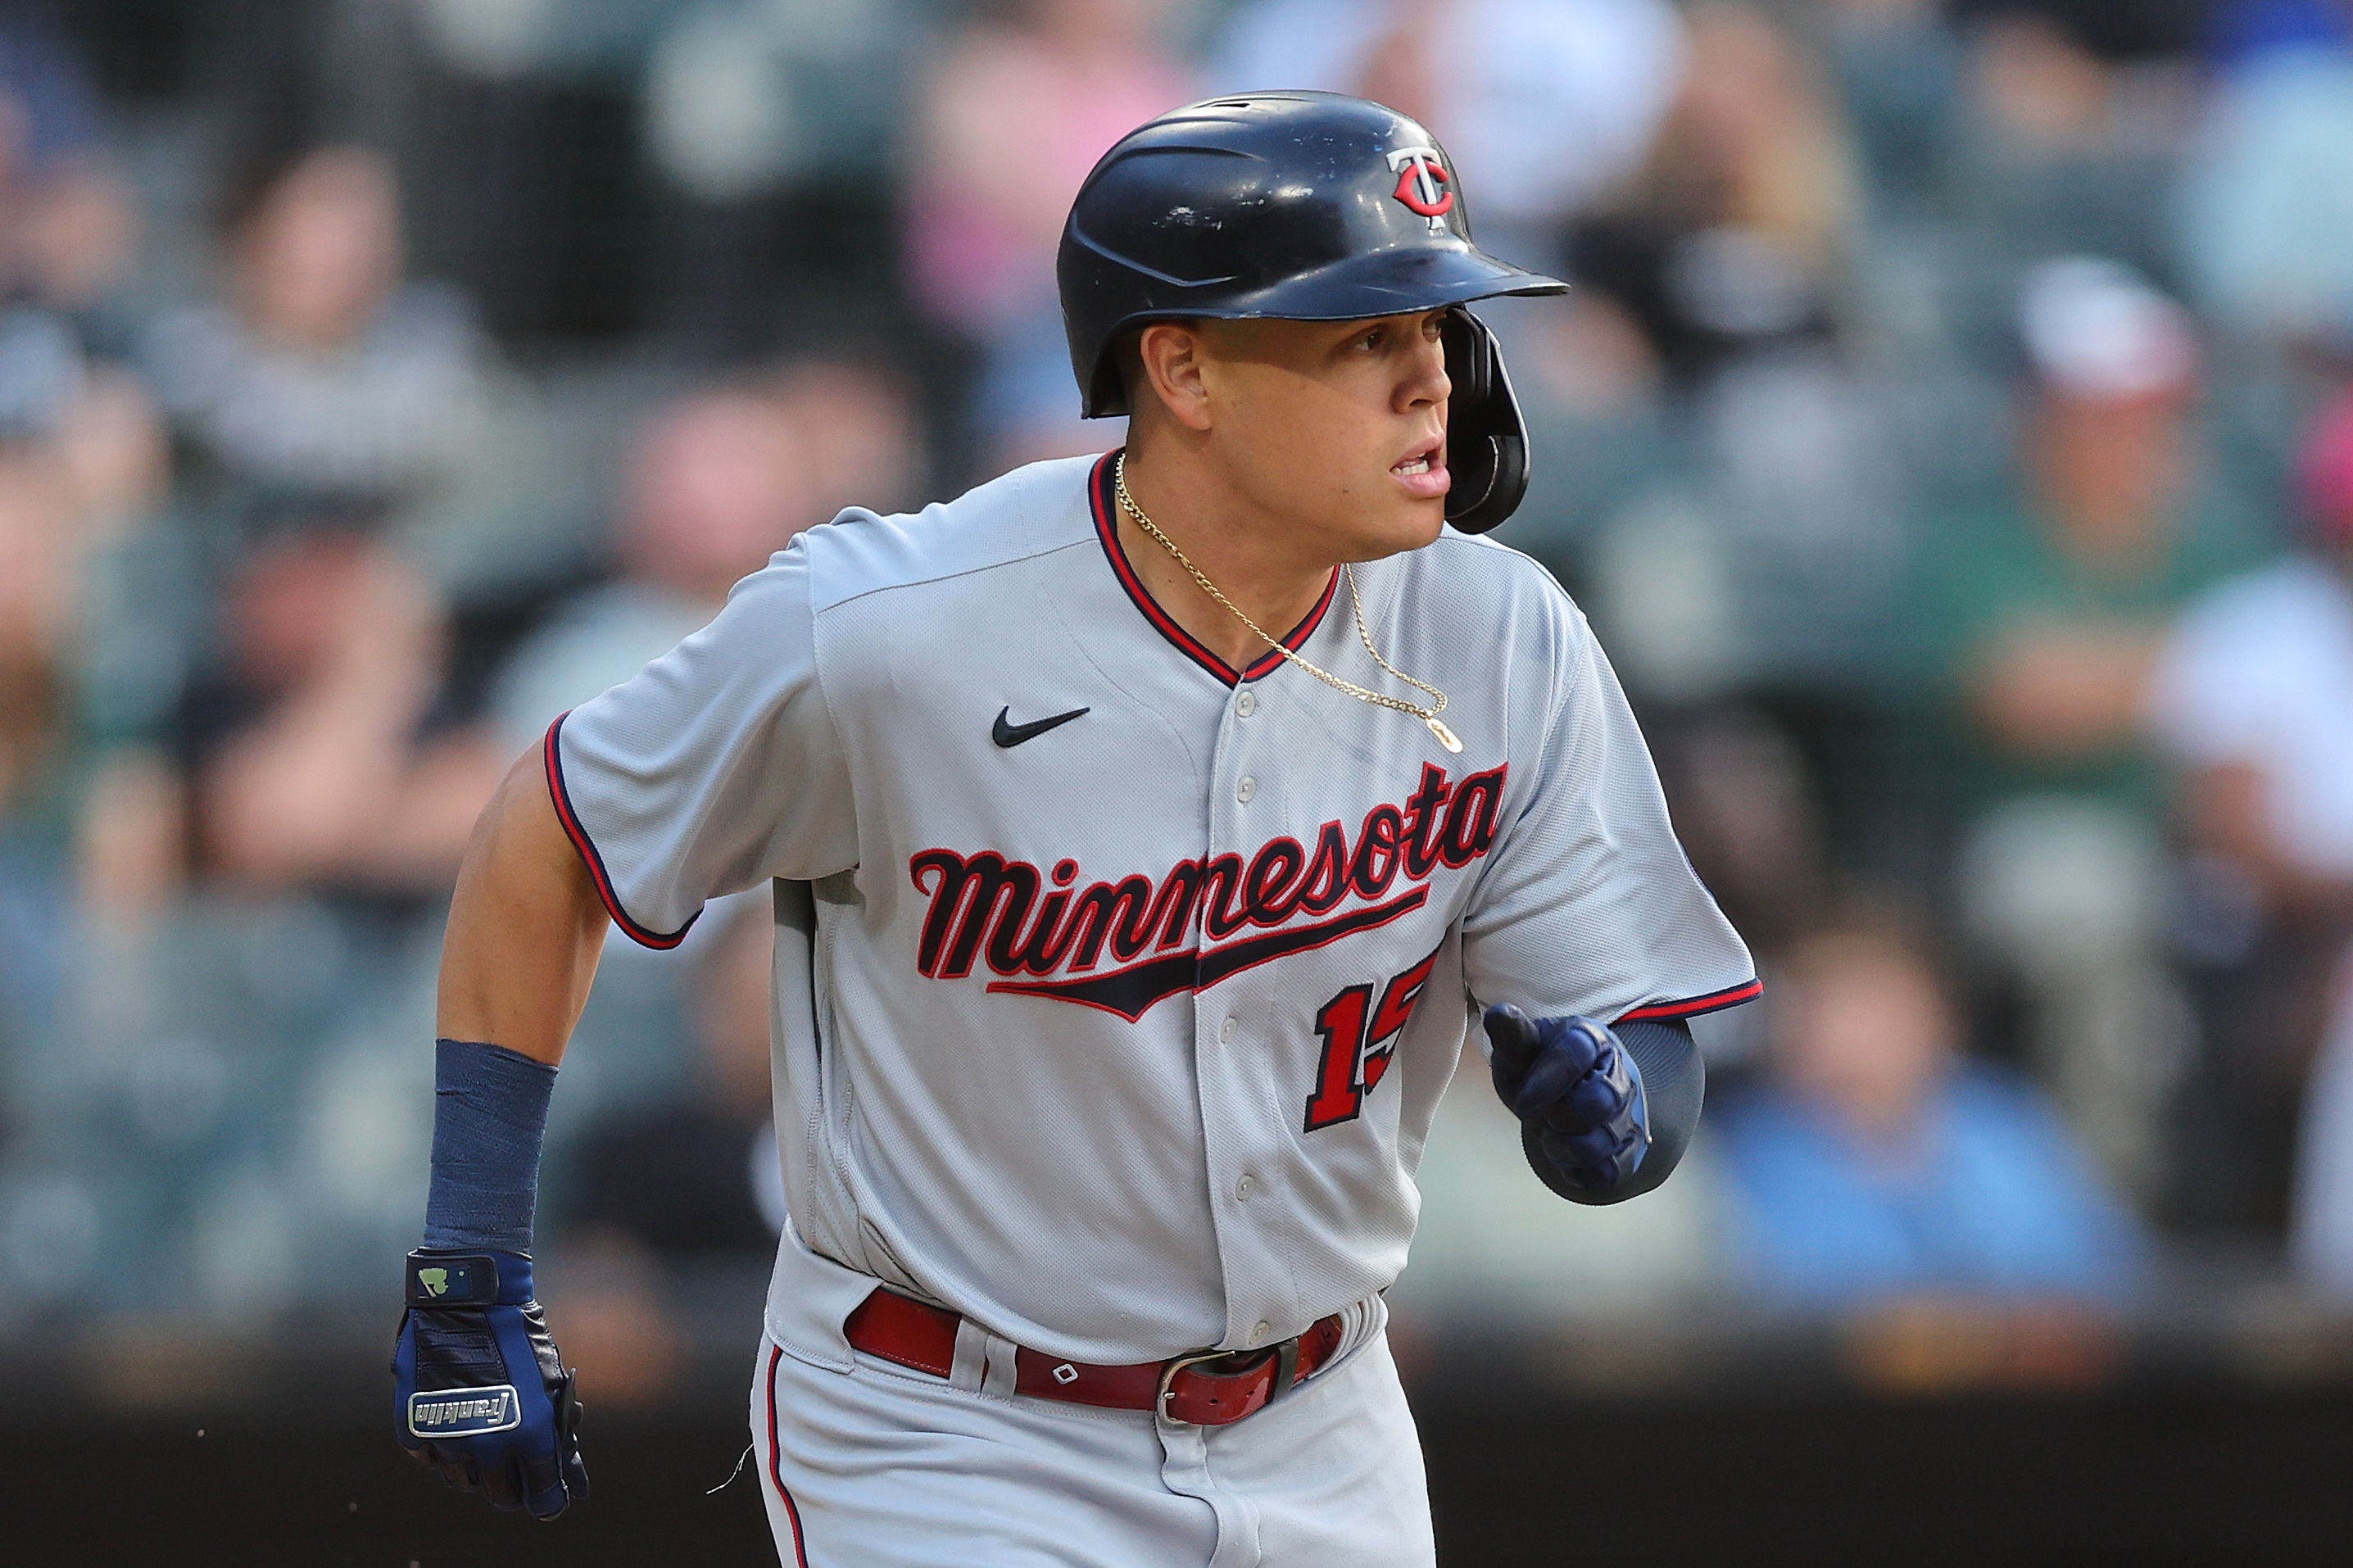 New father Gio Urshela's 10th-inning walk-off homer for Twins